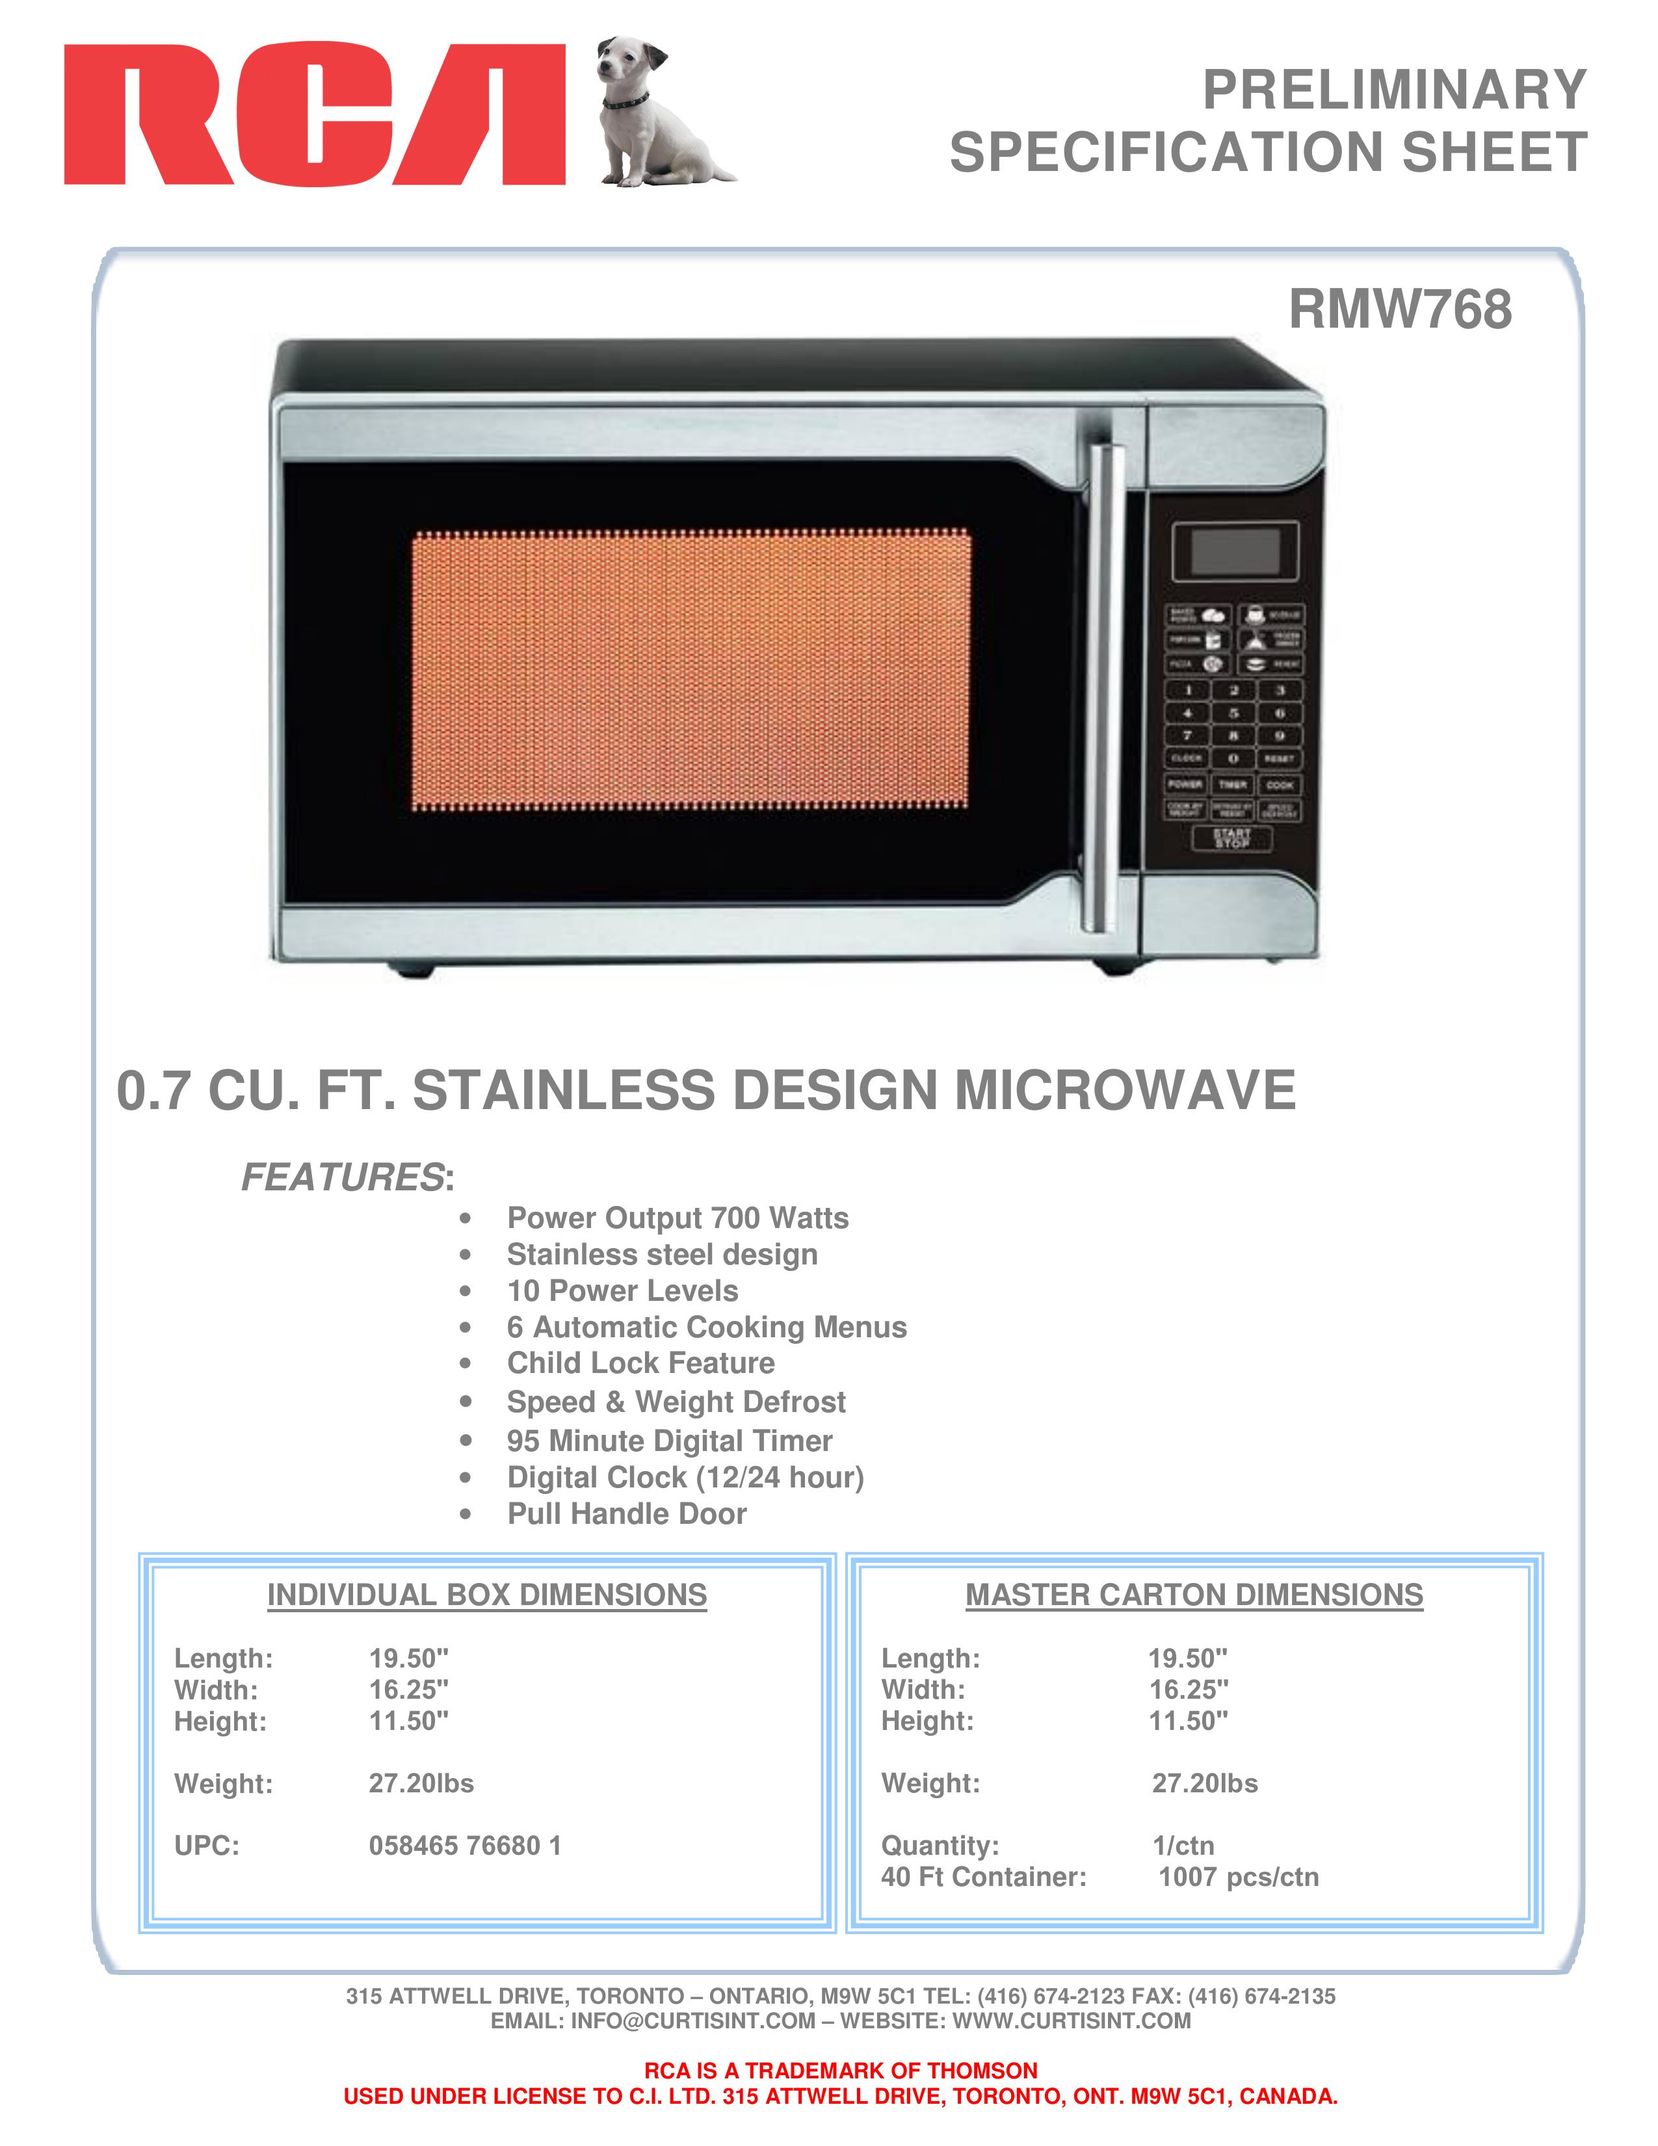 Curtis RMW768 Microwave Oven User Manual